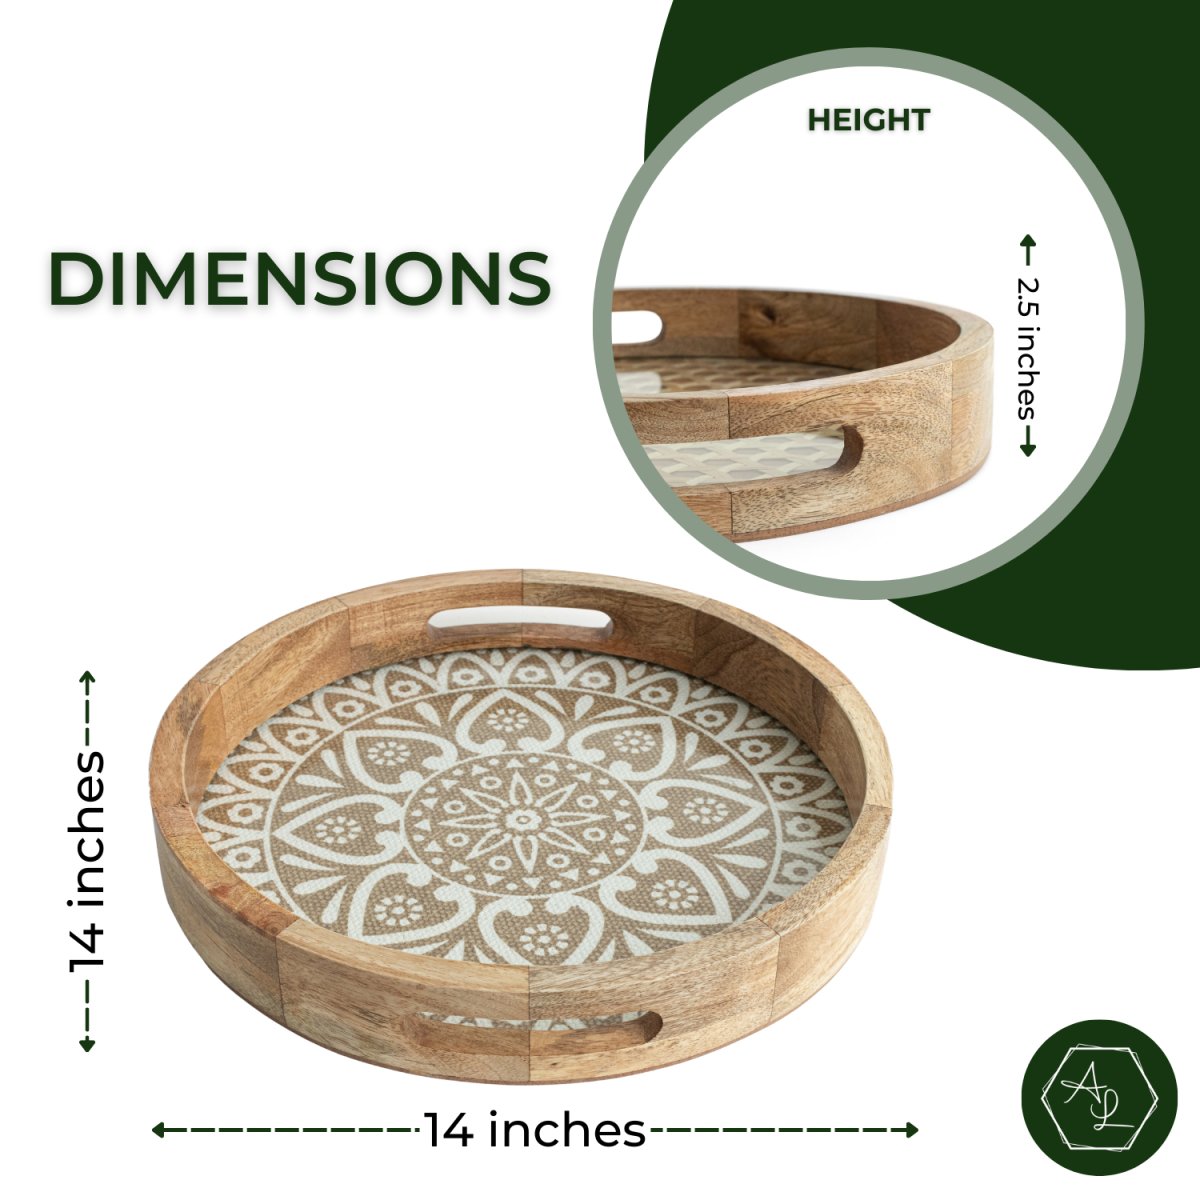 Round Wooden Coffee Table Tray with Knitted Cotton Mat & Glass base dimensions image - Aesthetic Living